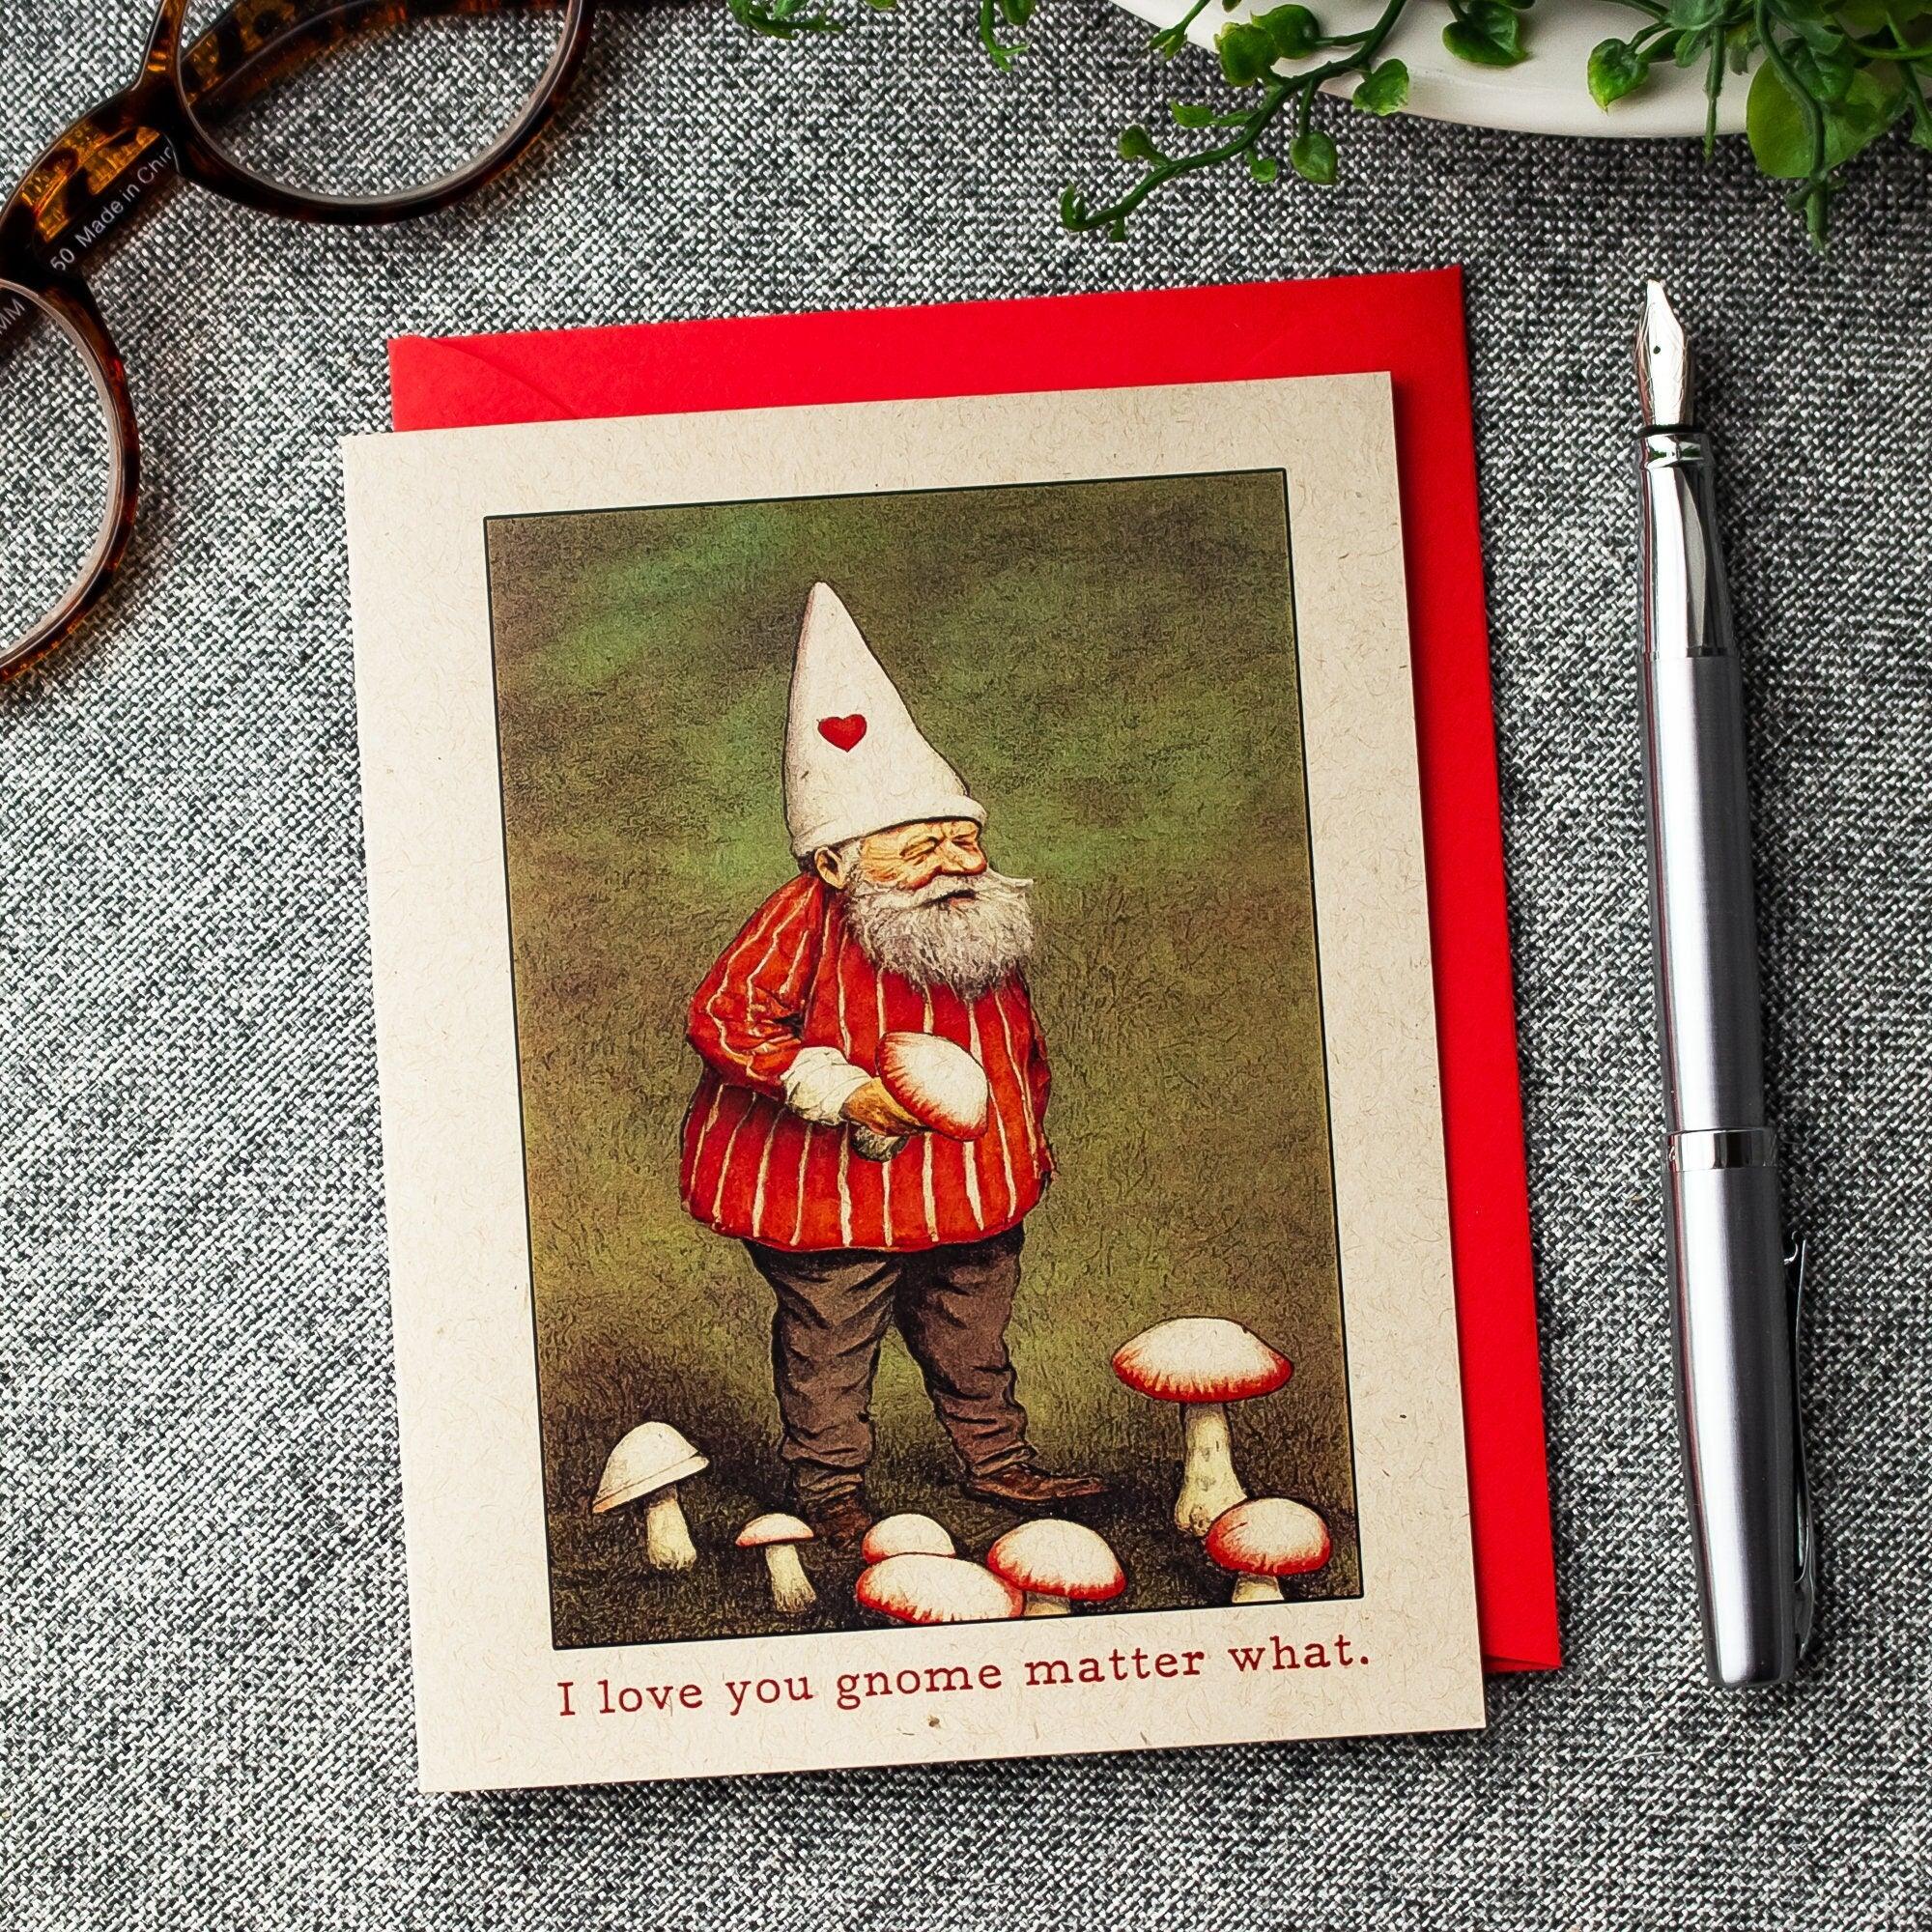 Gnome Valentine's Day Card - I Love You Gnome Matter What - Vintage Gnome and Mushroom - Punny Love Card